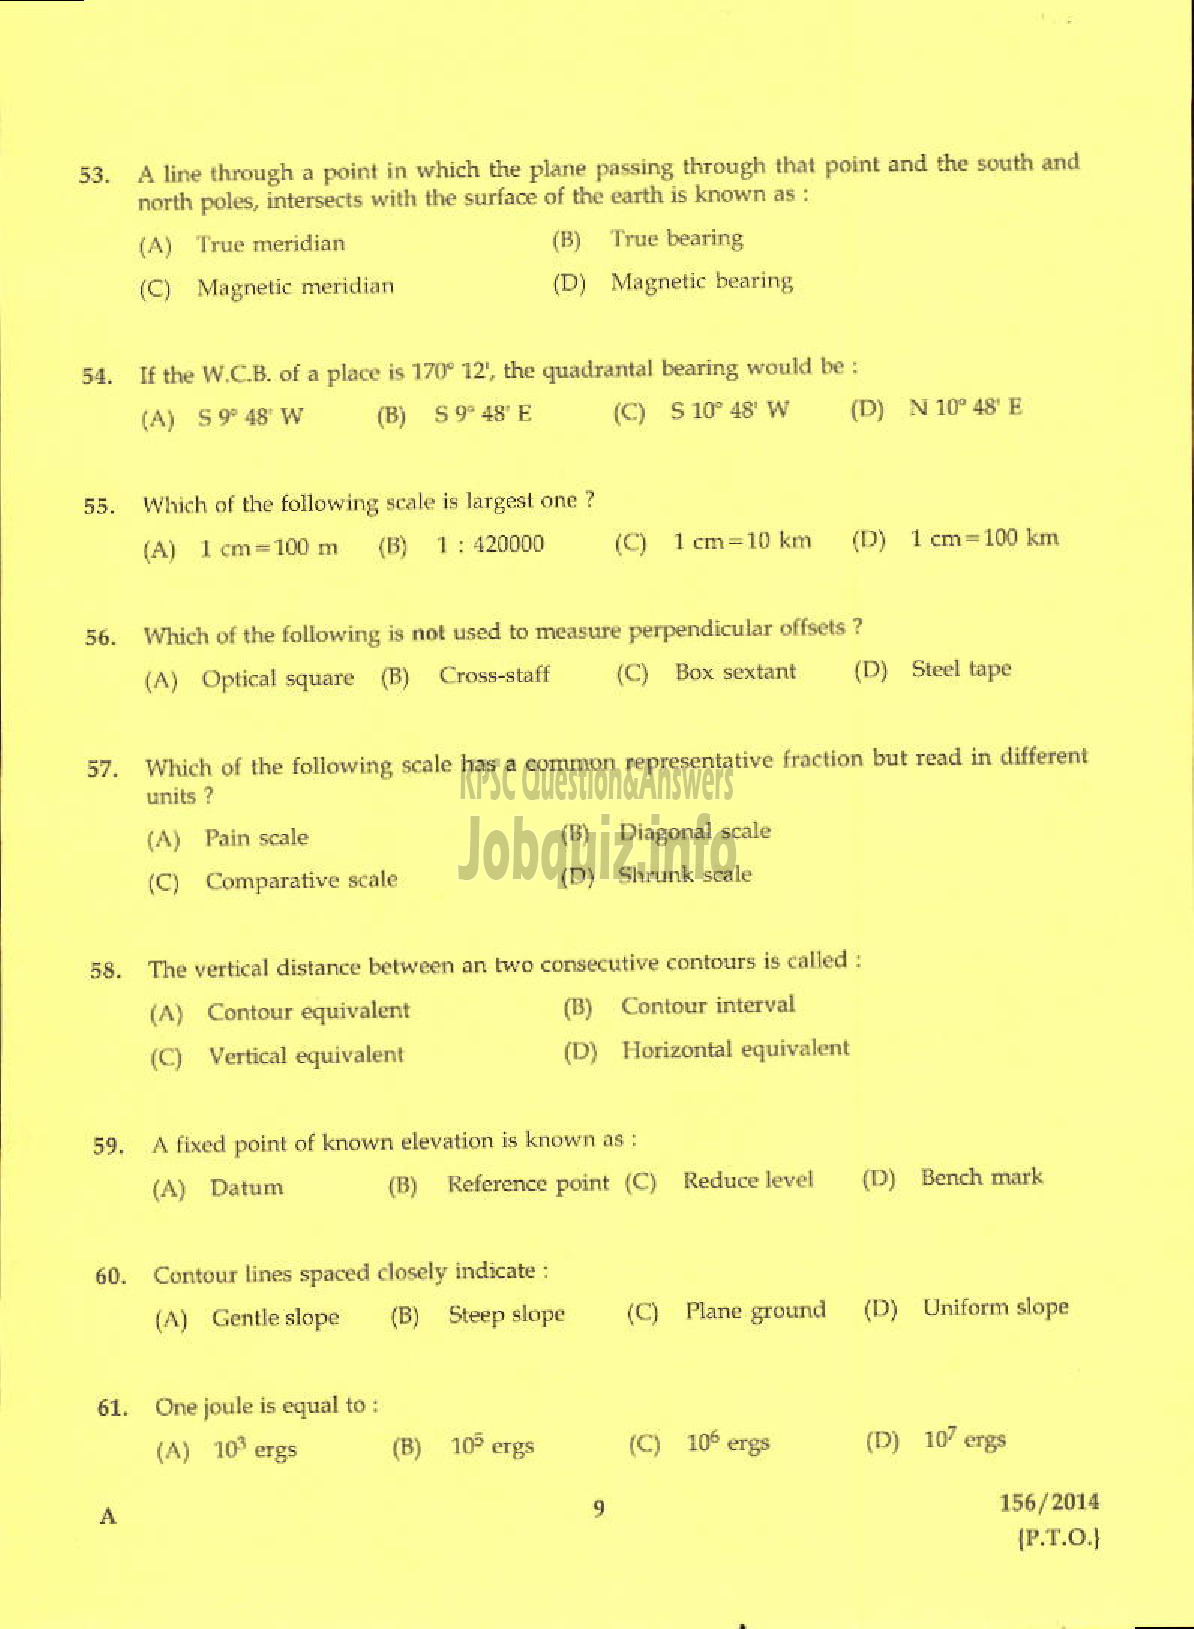 Kerala PSC Question Paper - TRACER SURVEY AND LAND RECORDS-7